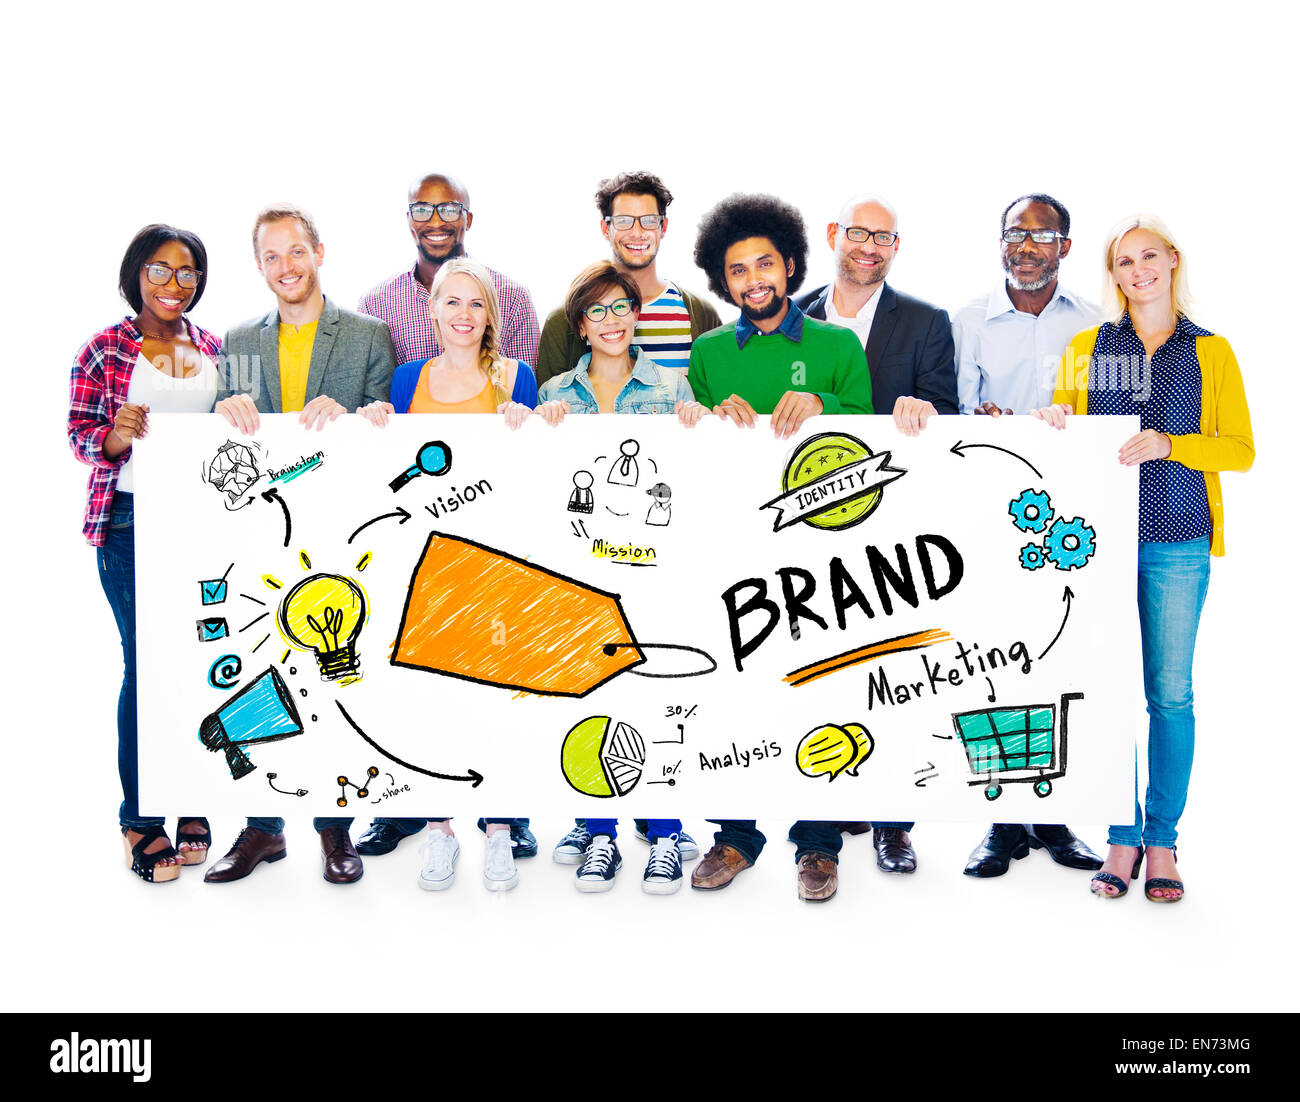 Diverse People Banner Marketing Brand Concept Stock Photo